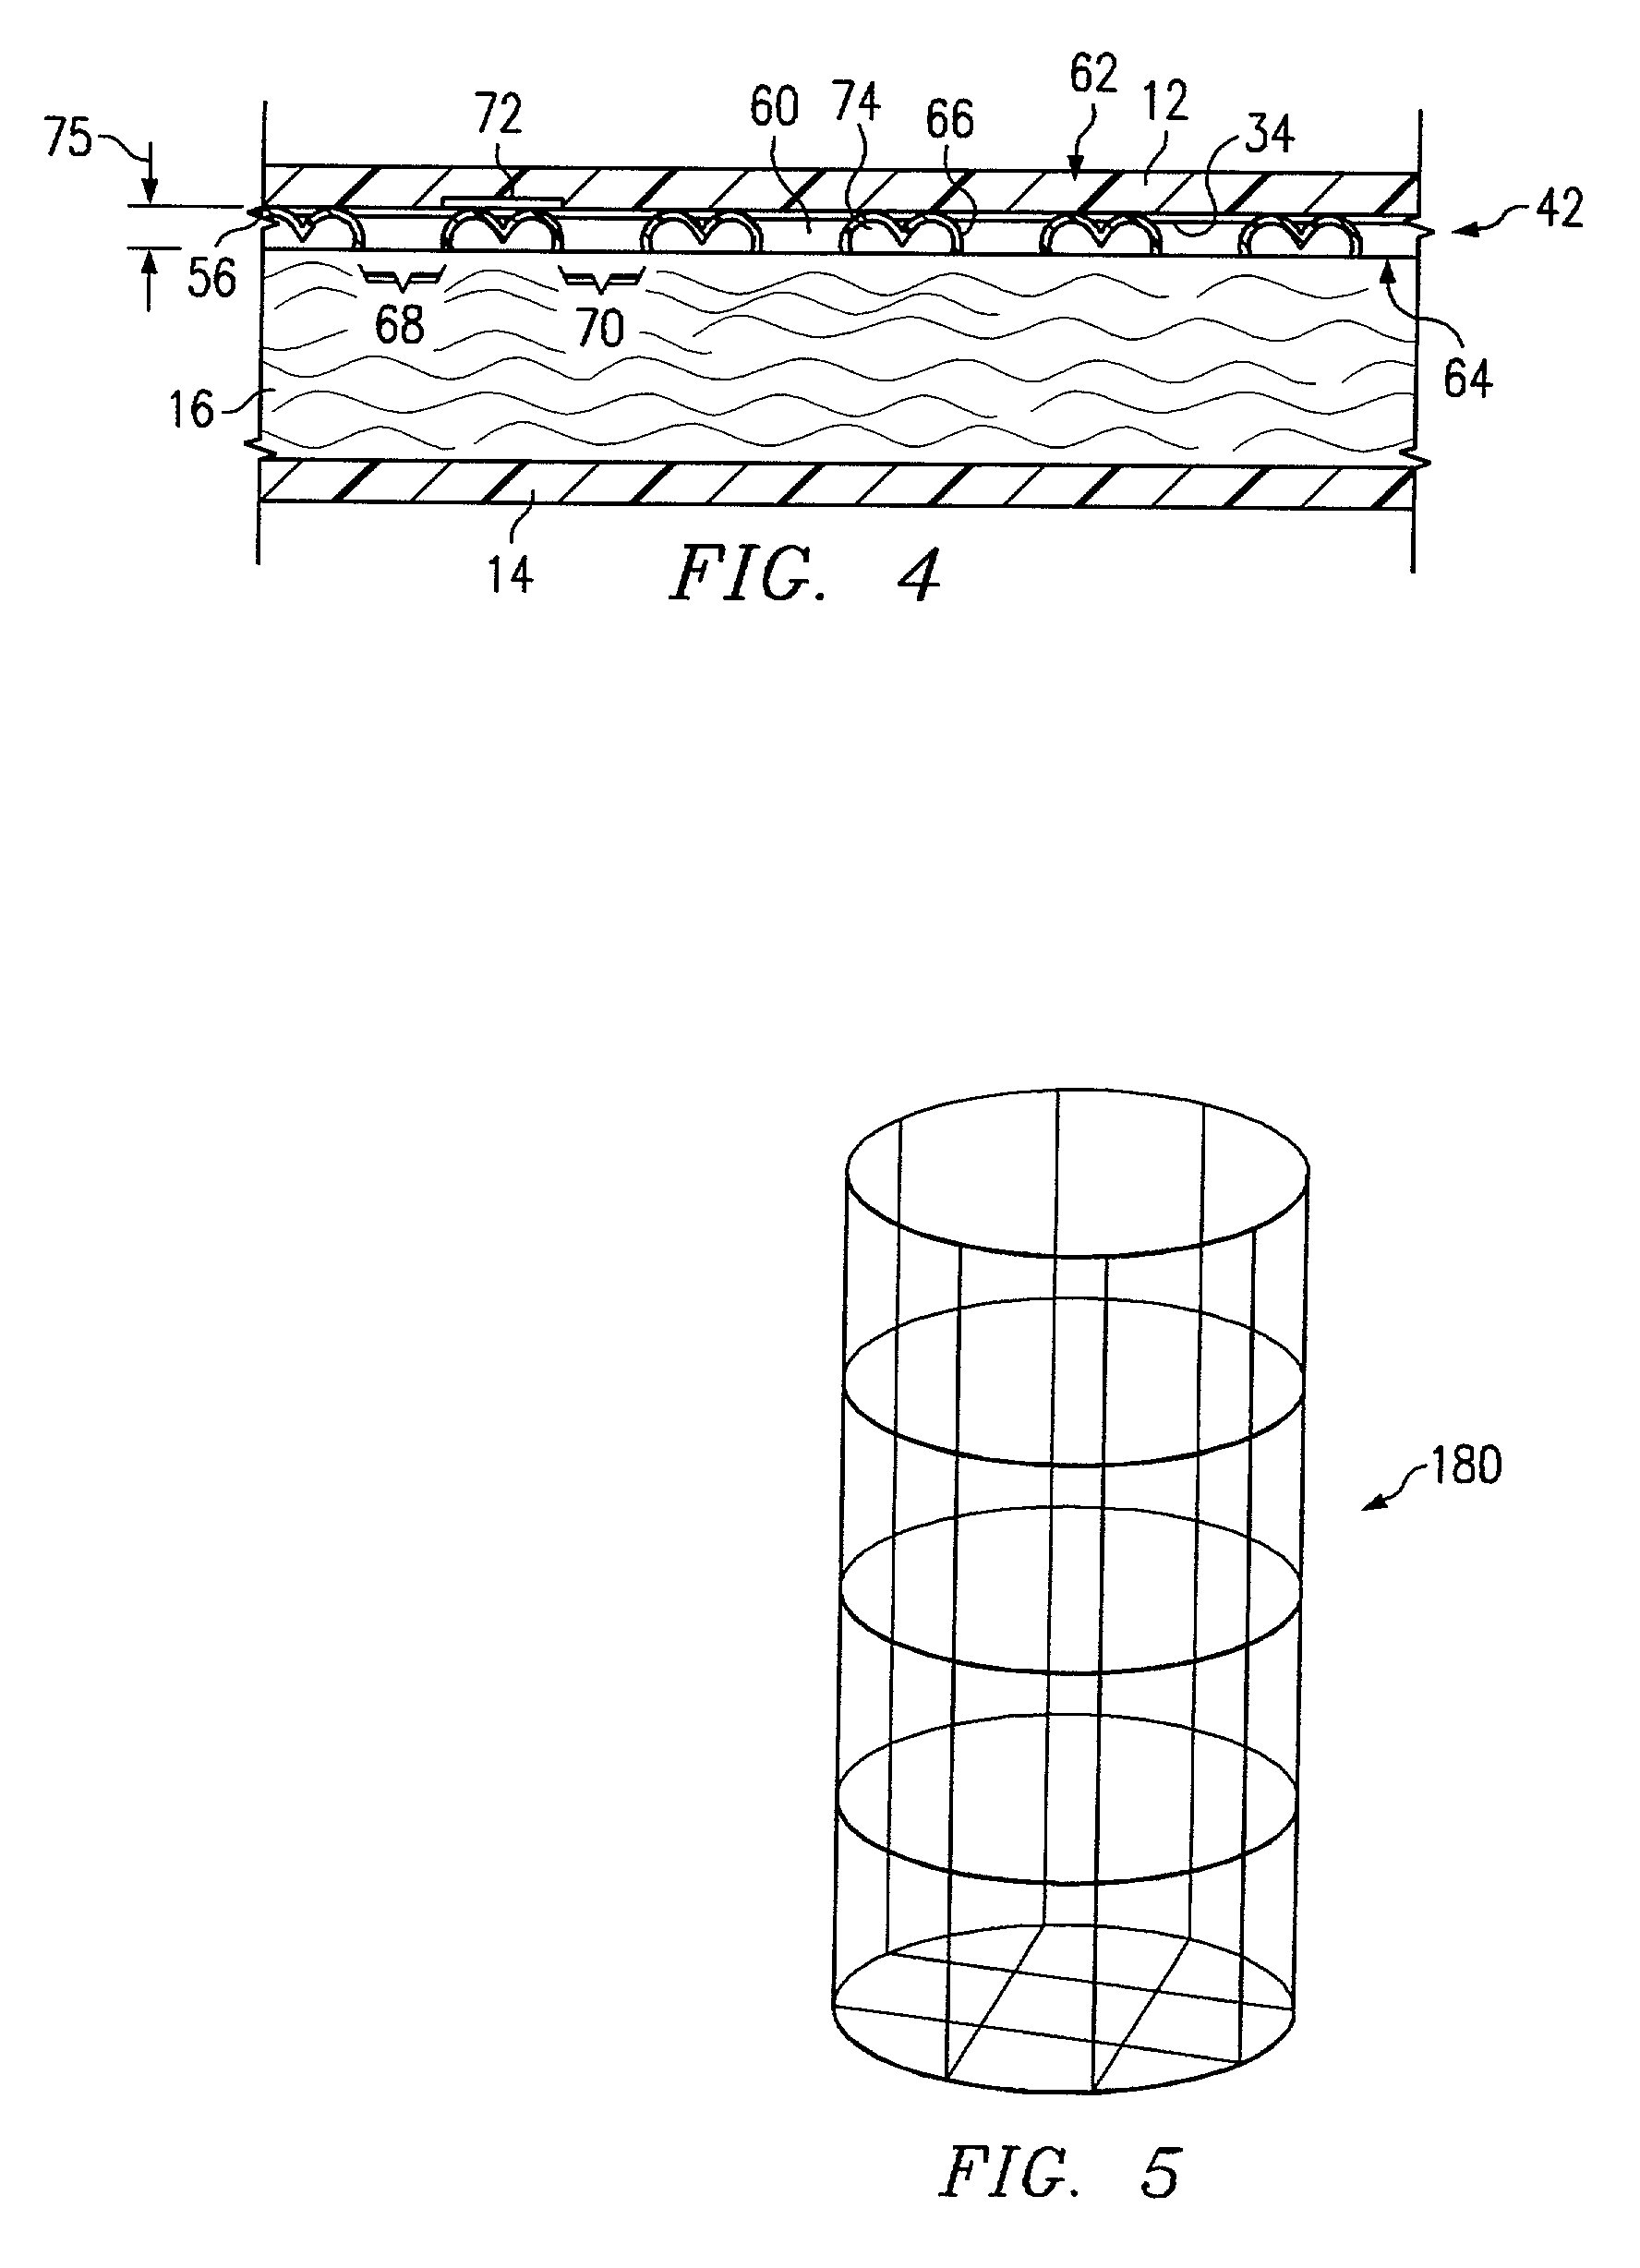 Absorbent article having a surface energy gradient between the topsheet and the acquisition distribution layer